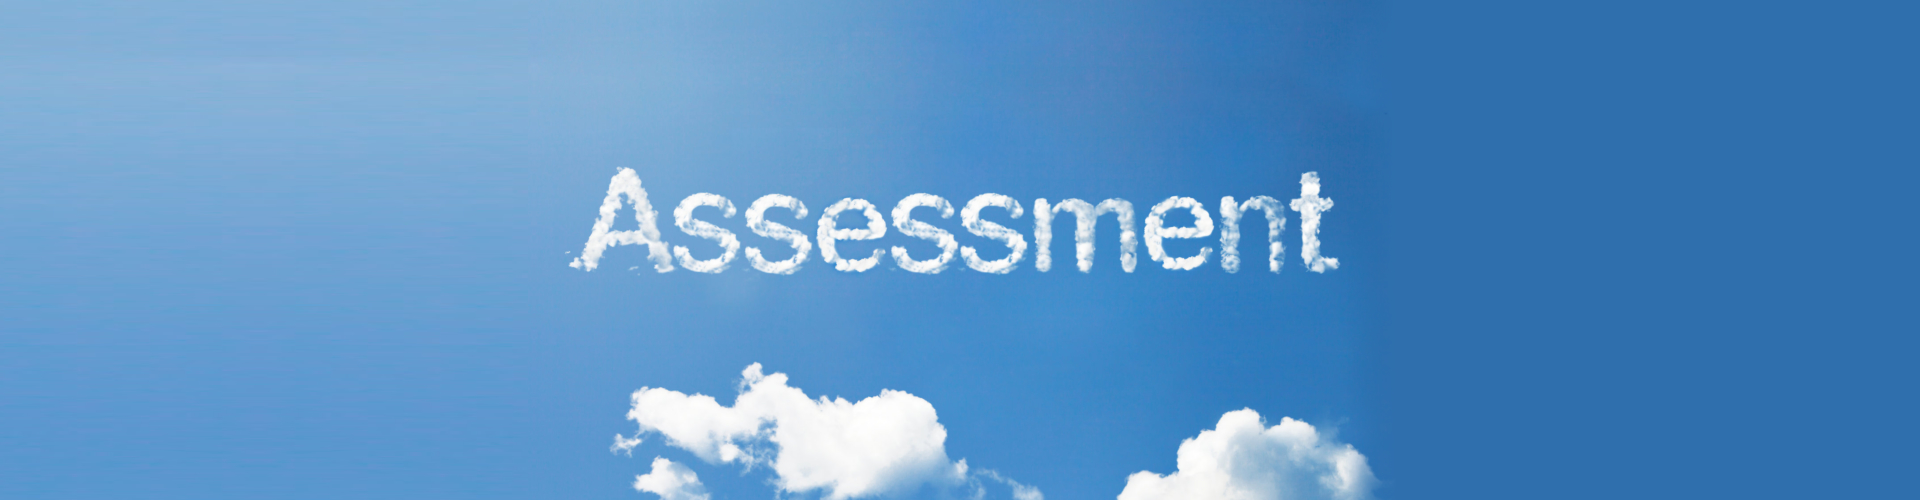 Assessment cloud word on sky